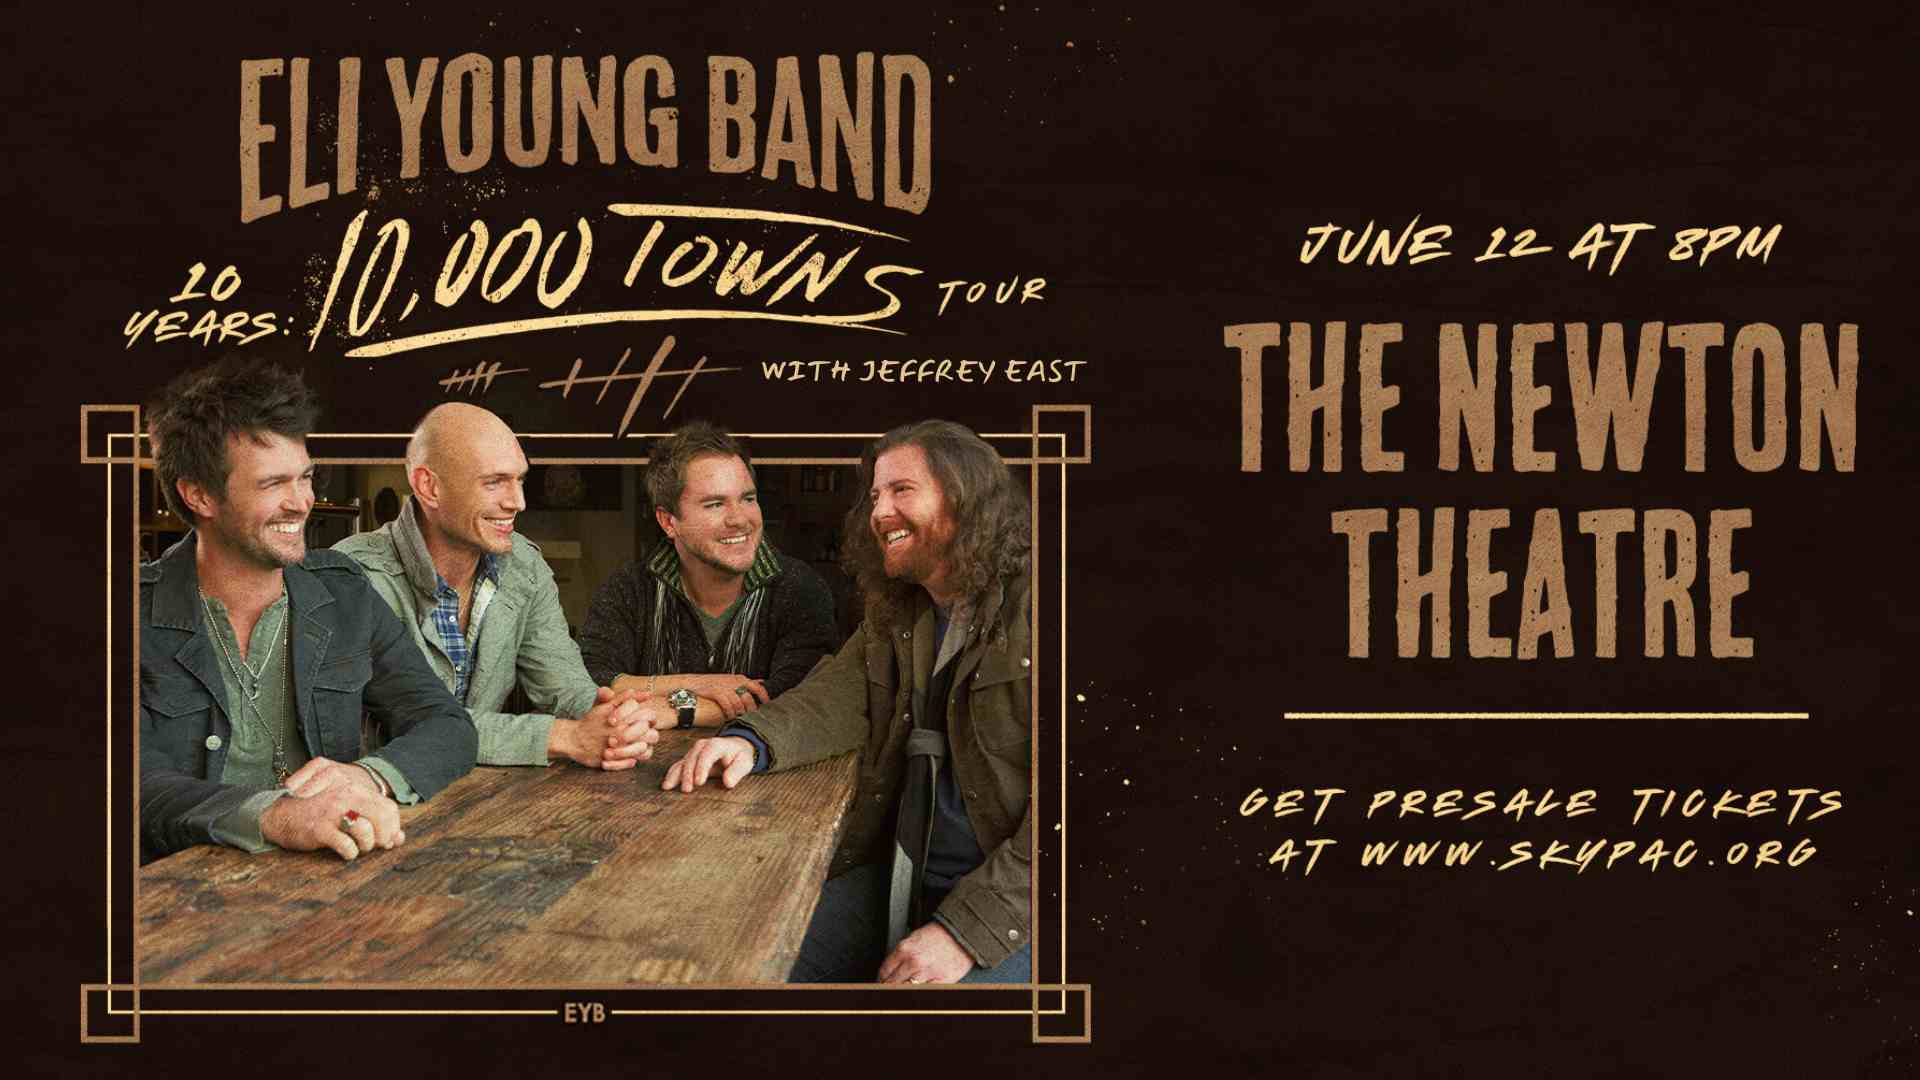 Eli Young Band plays The Newton Theatre on Wednesday, June 12th 